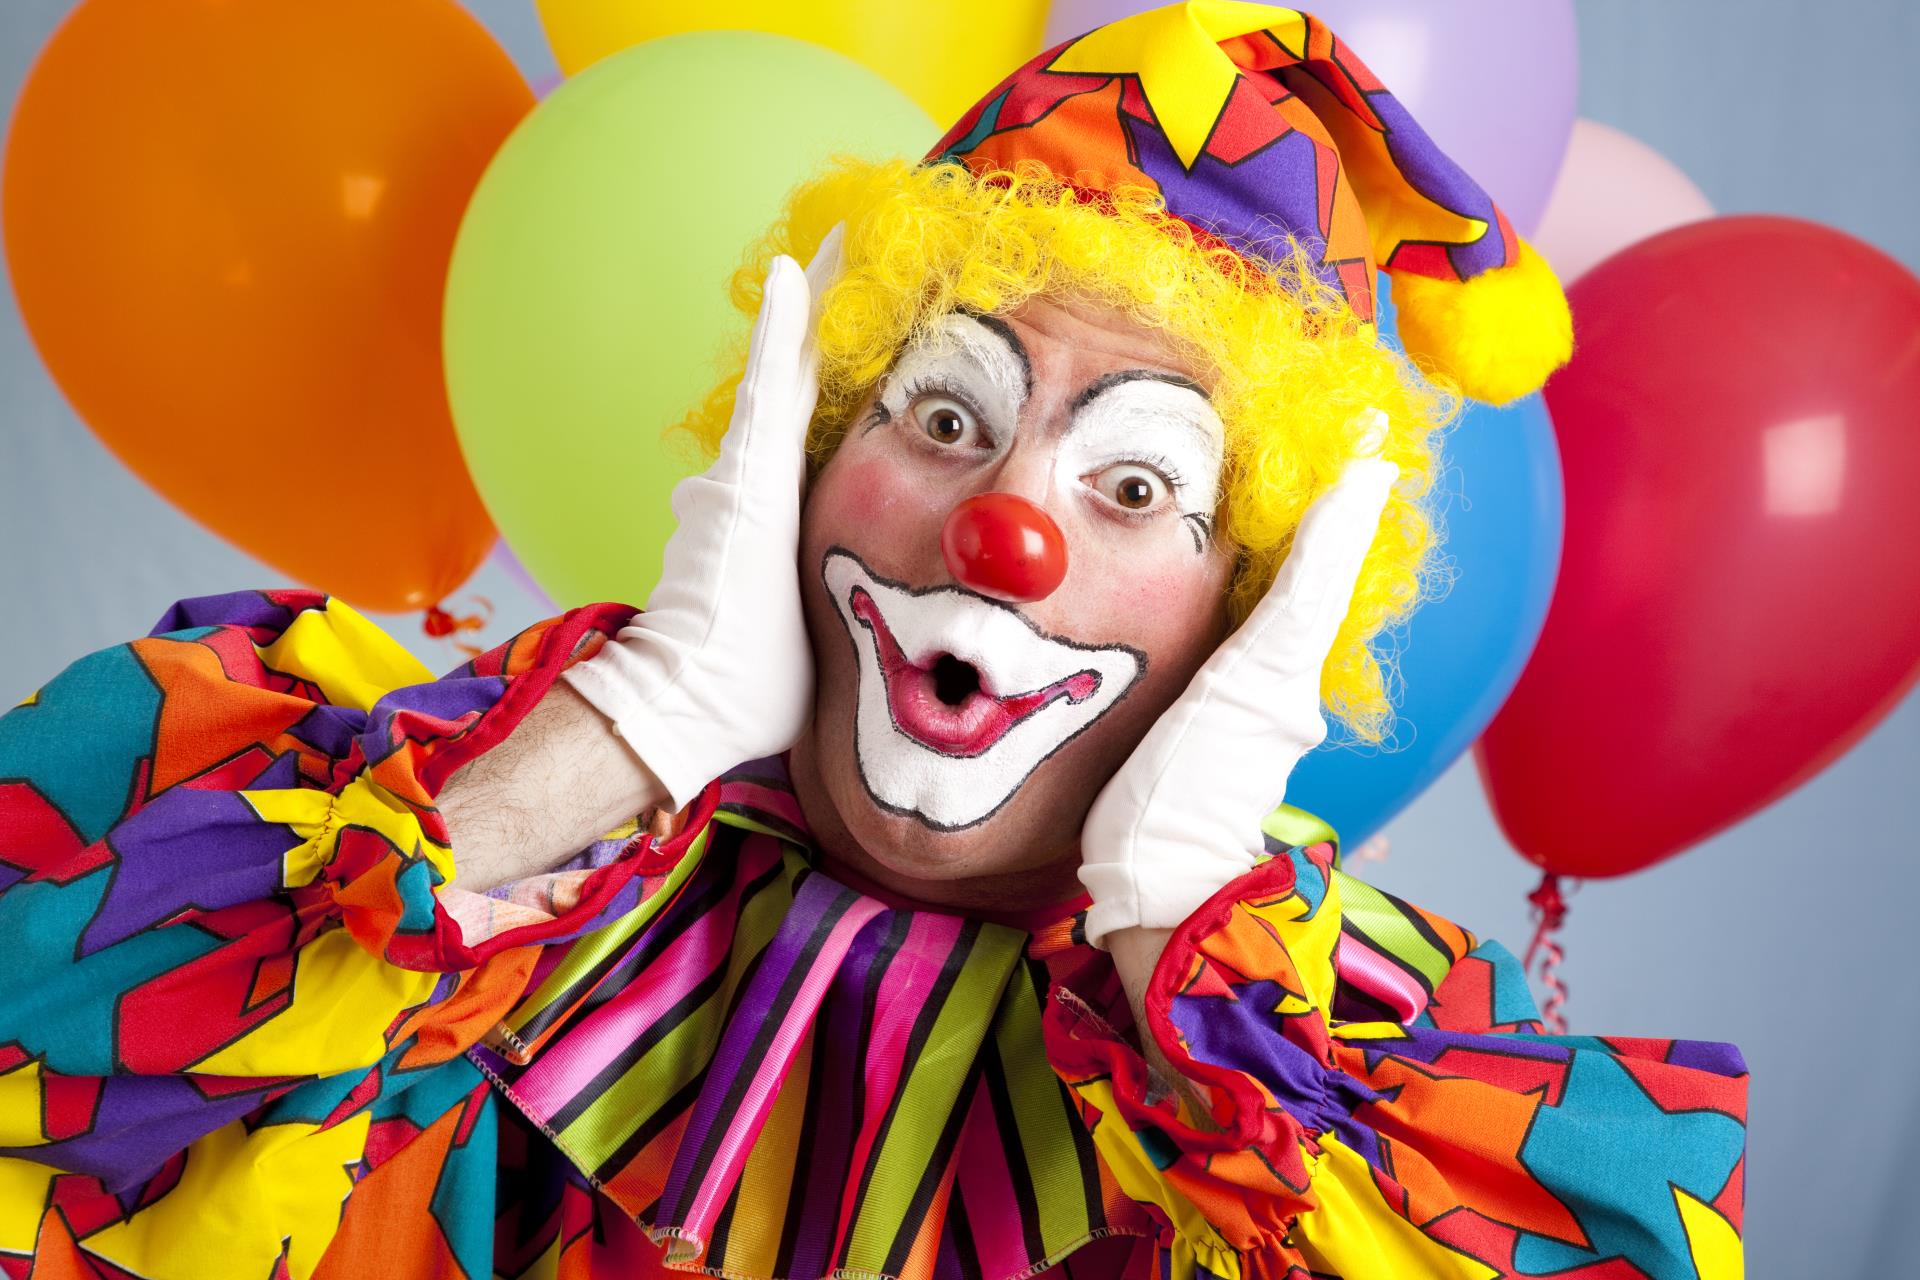 Colorful male clown standing in front of balloons